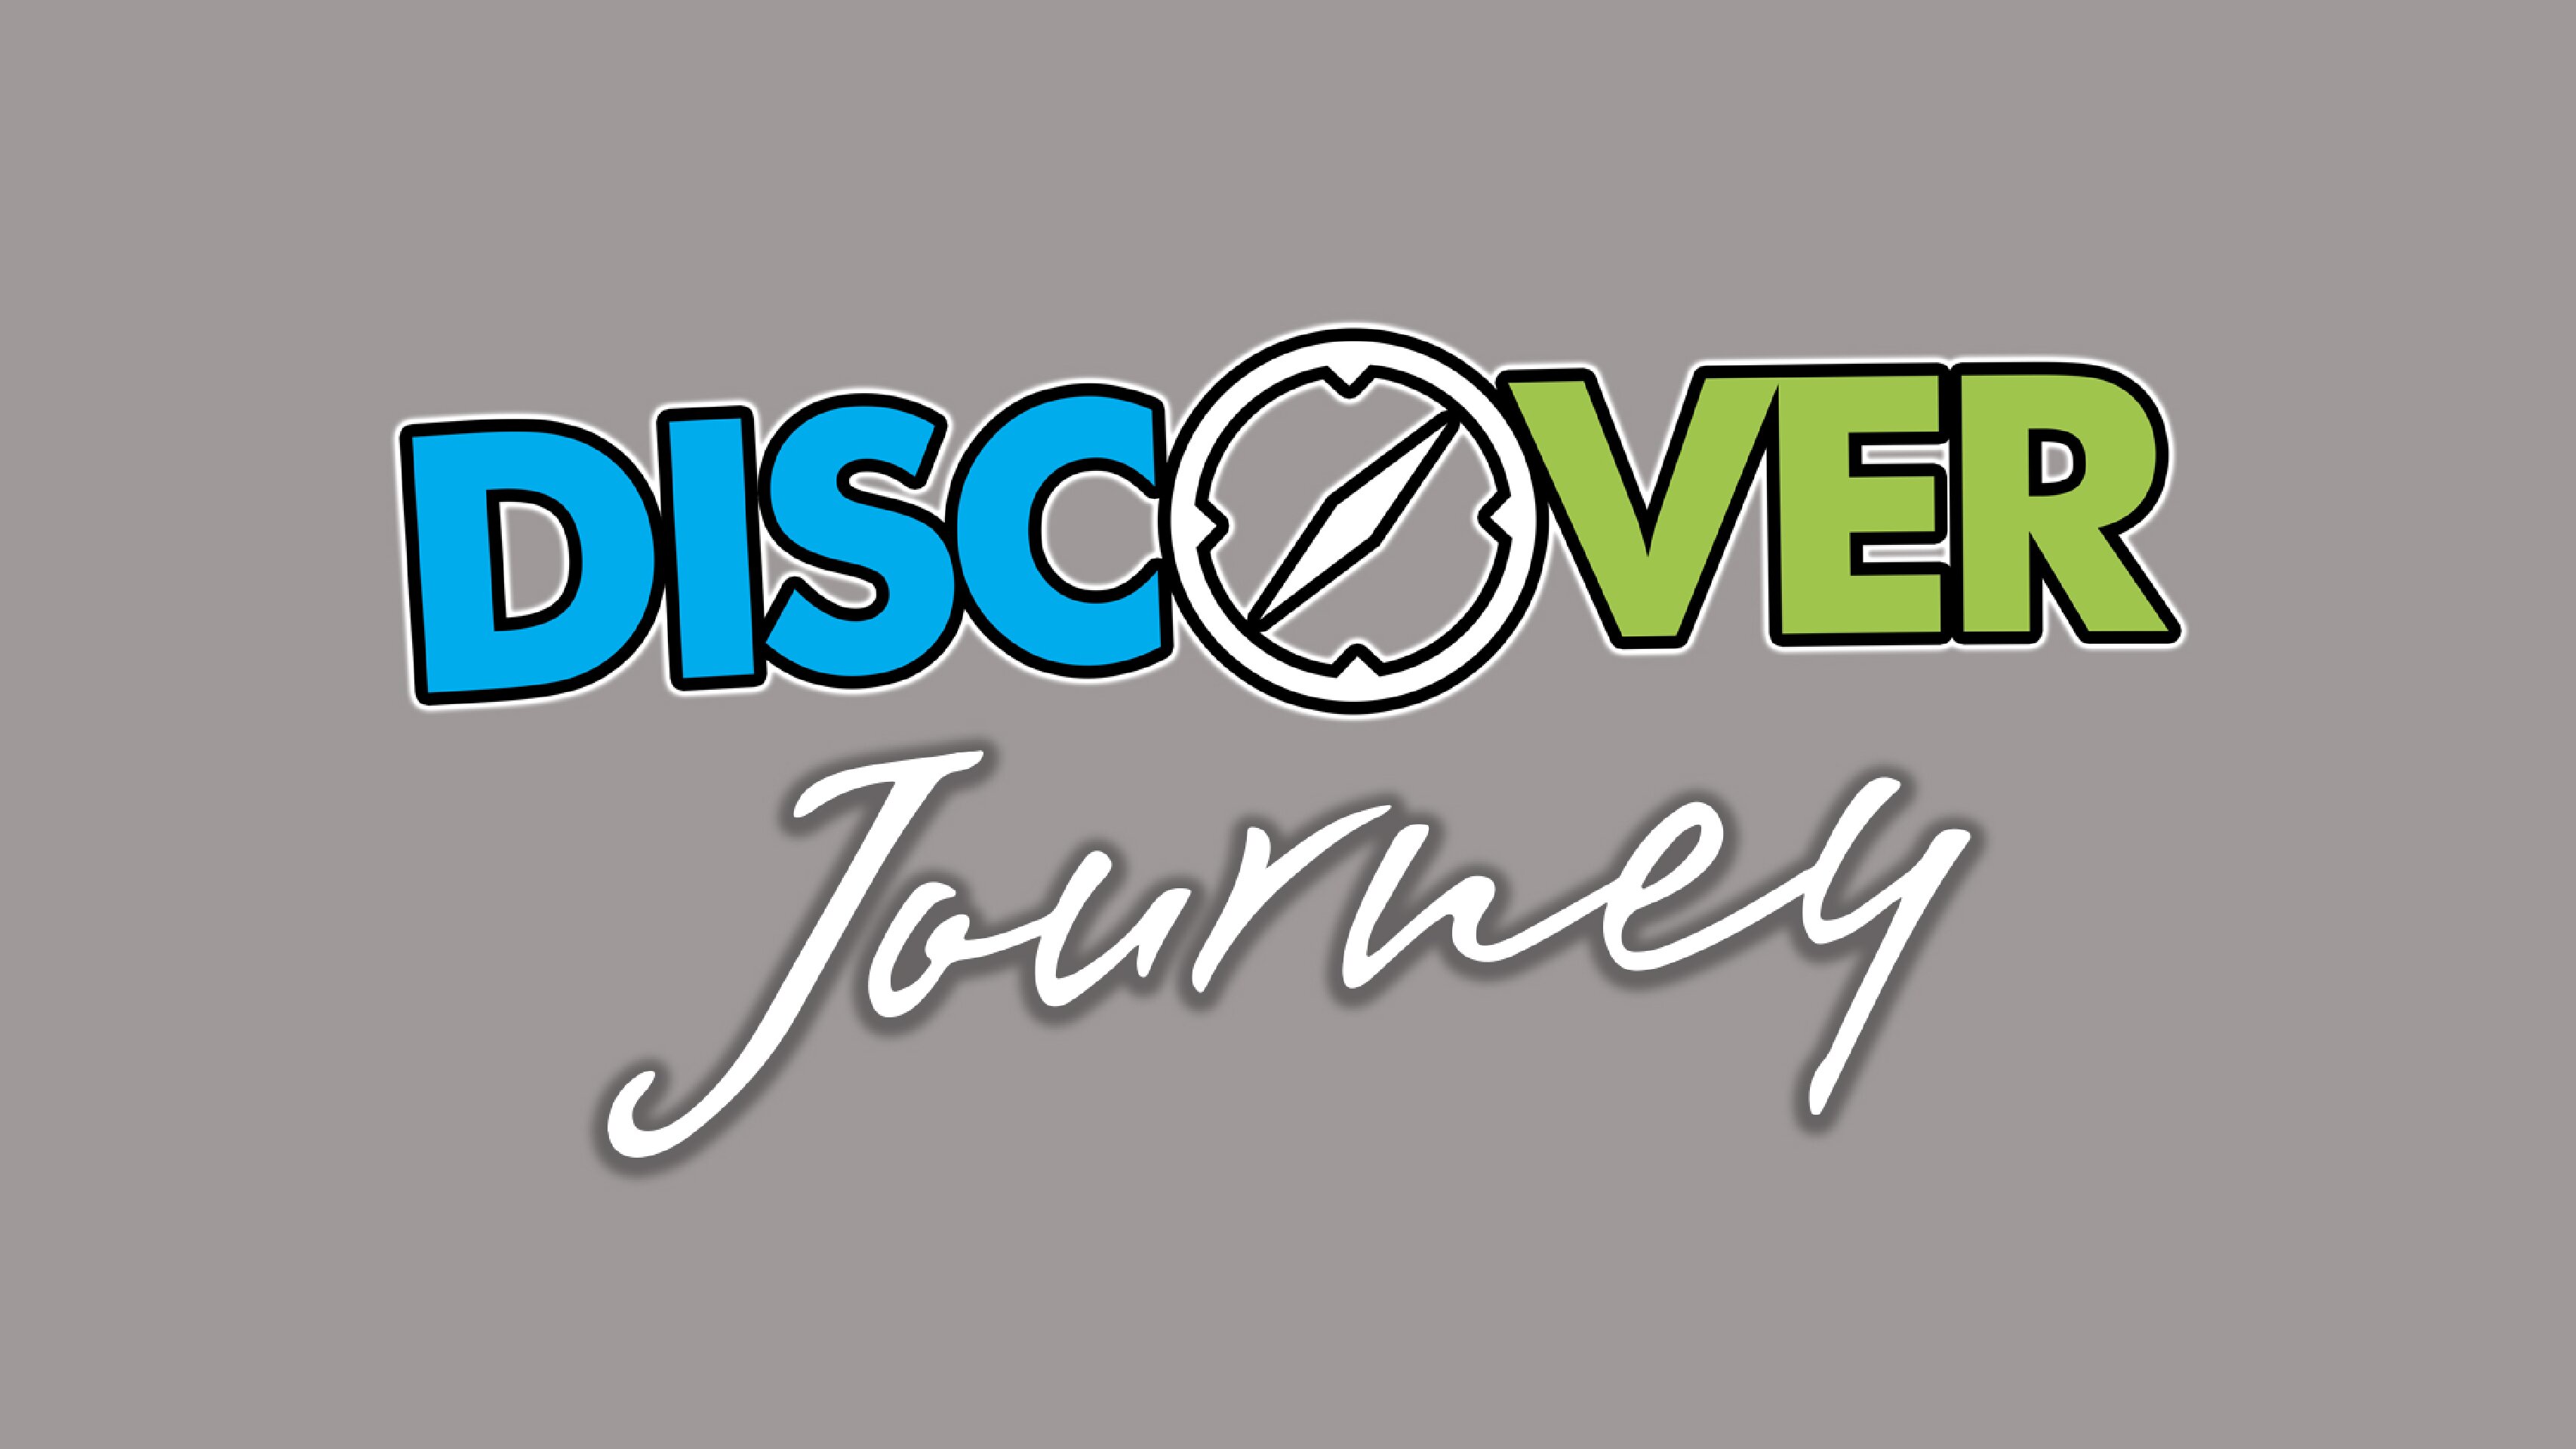 Discover Journey